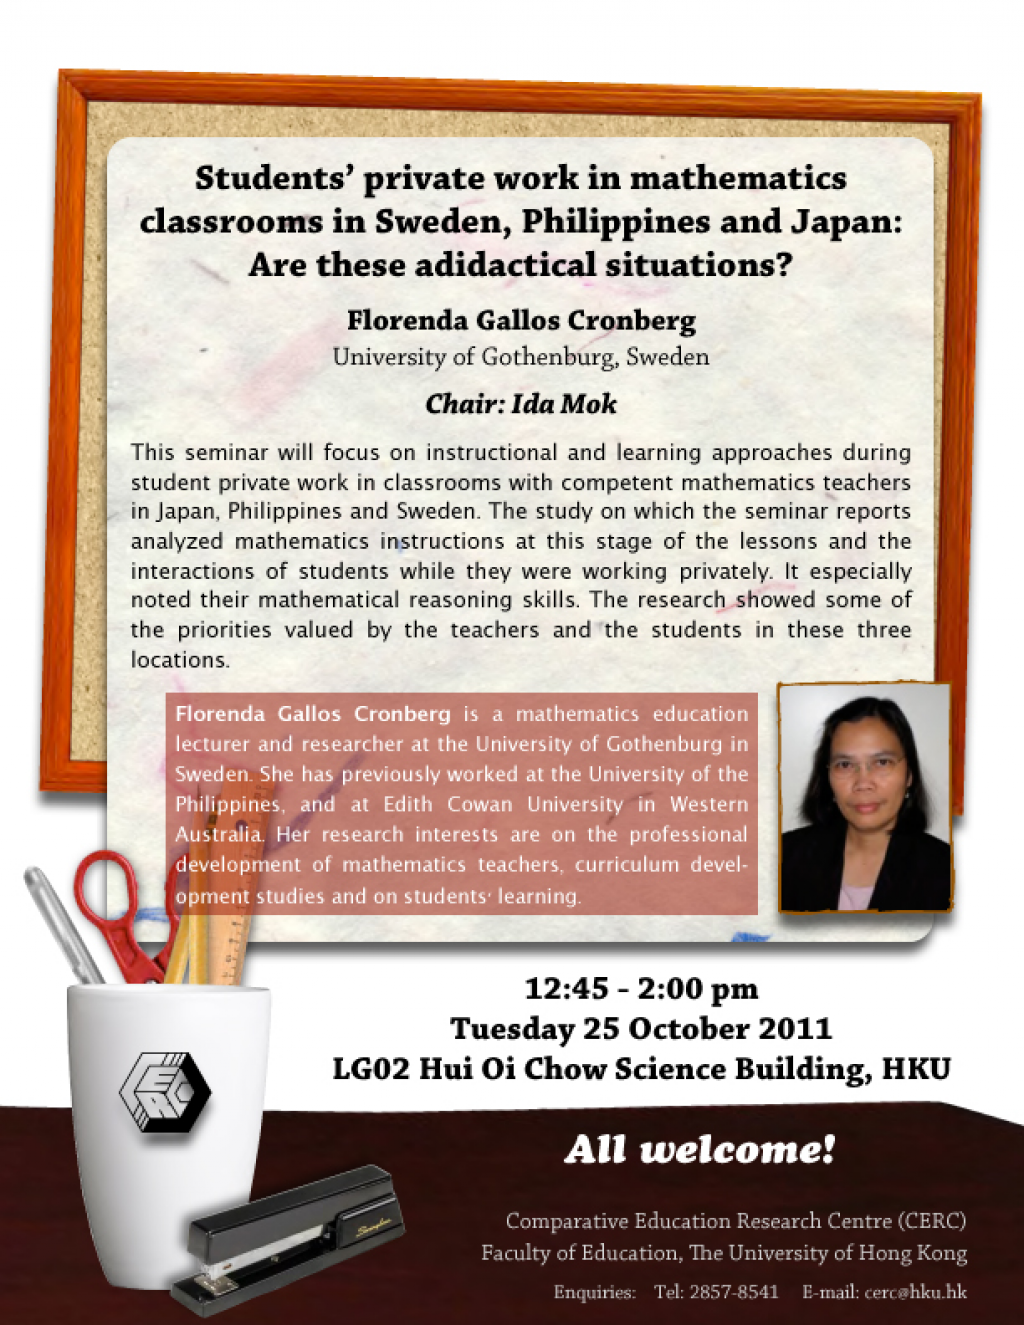 Seminar: Students' private work in mathematics classrooms in Sweden, Philippines and Japan